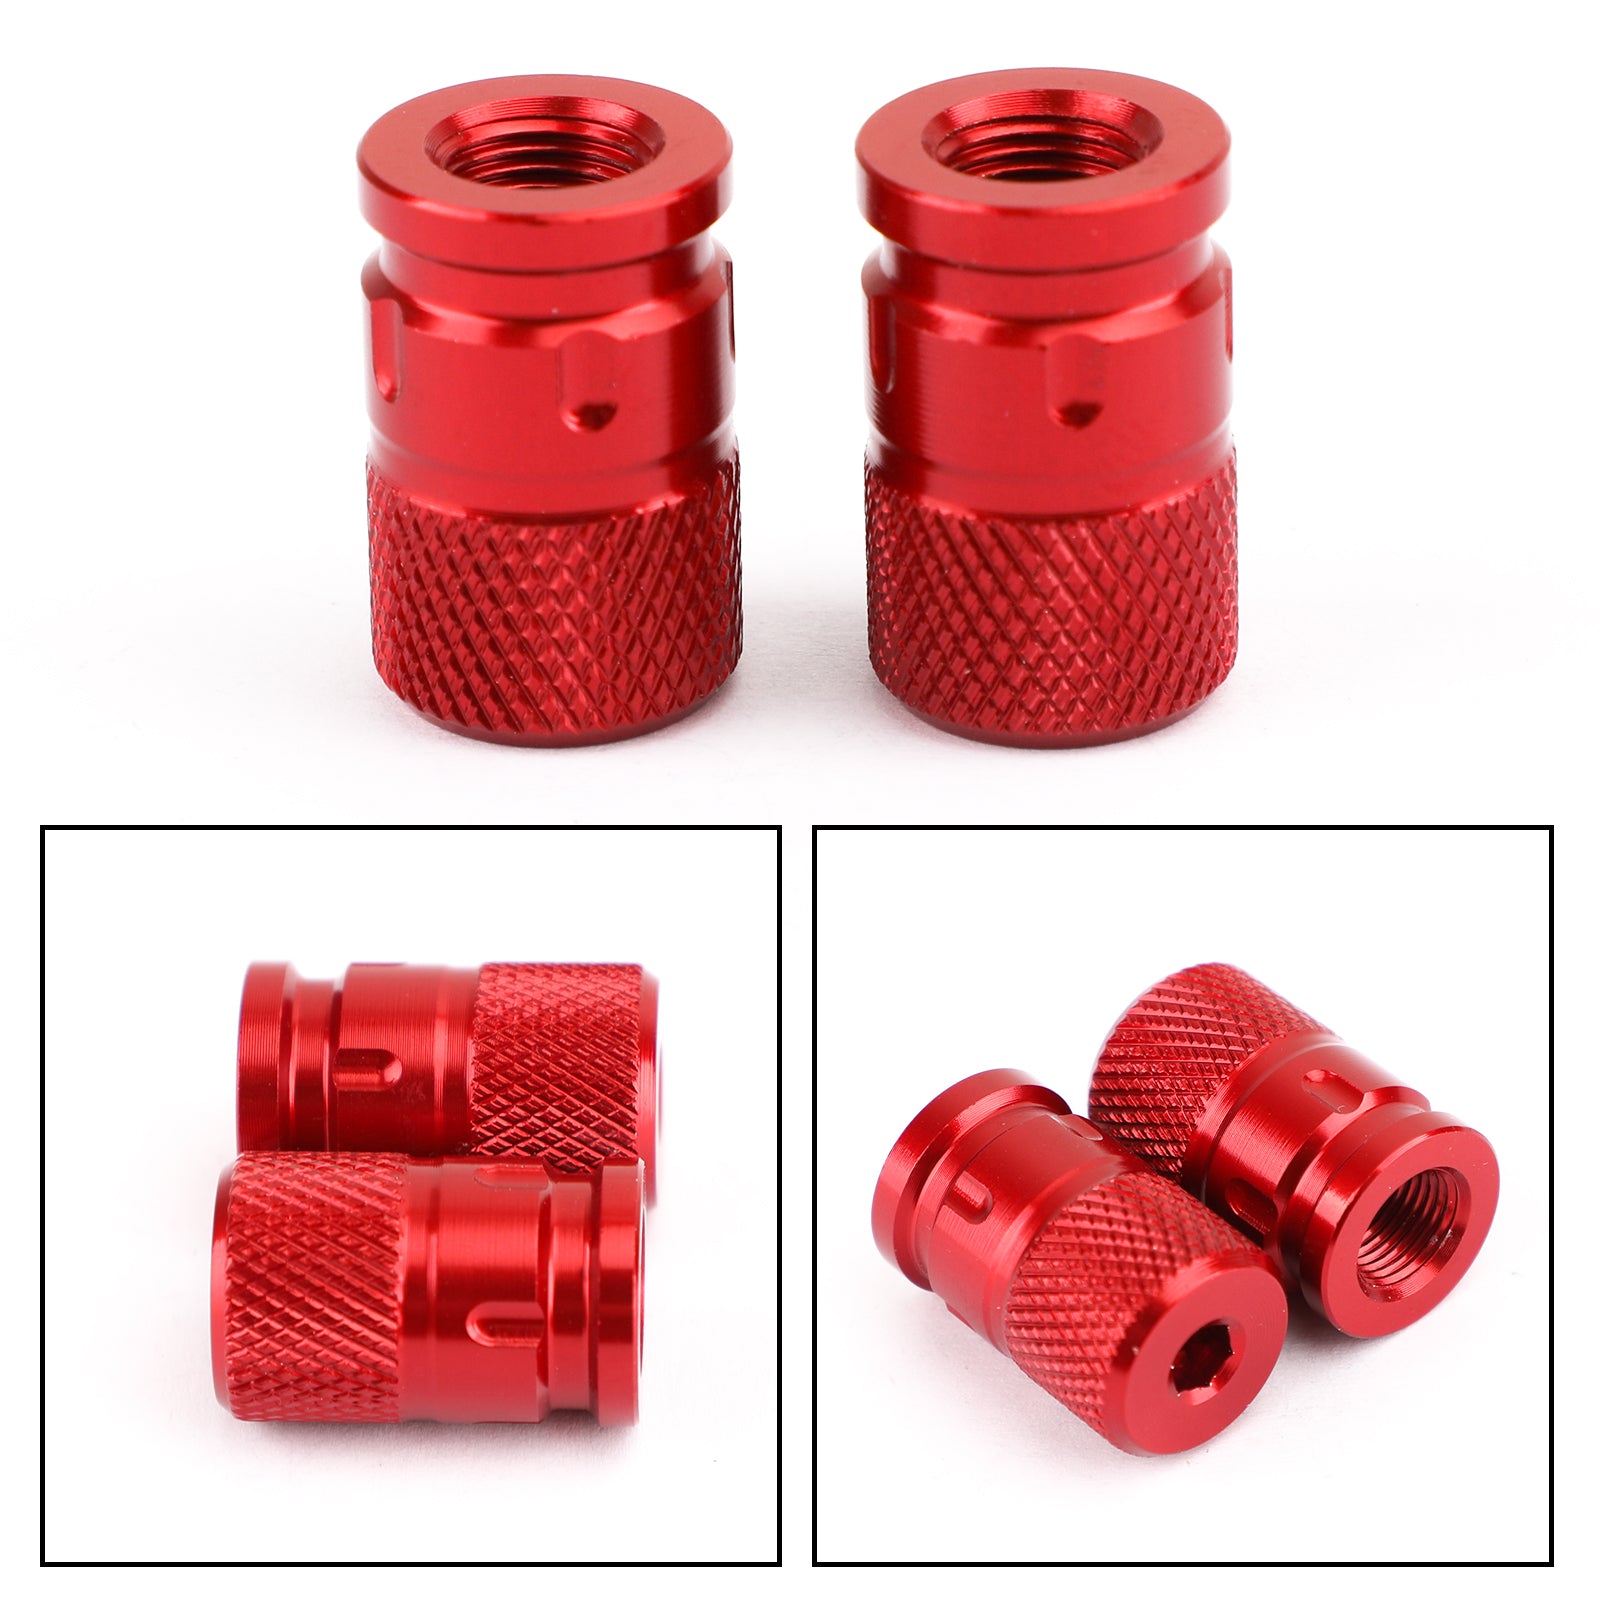 Pair CNC Red Anti-Thief Tire Valve Stem Caps For Car Truck Bike Motorcycle